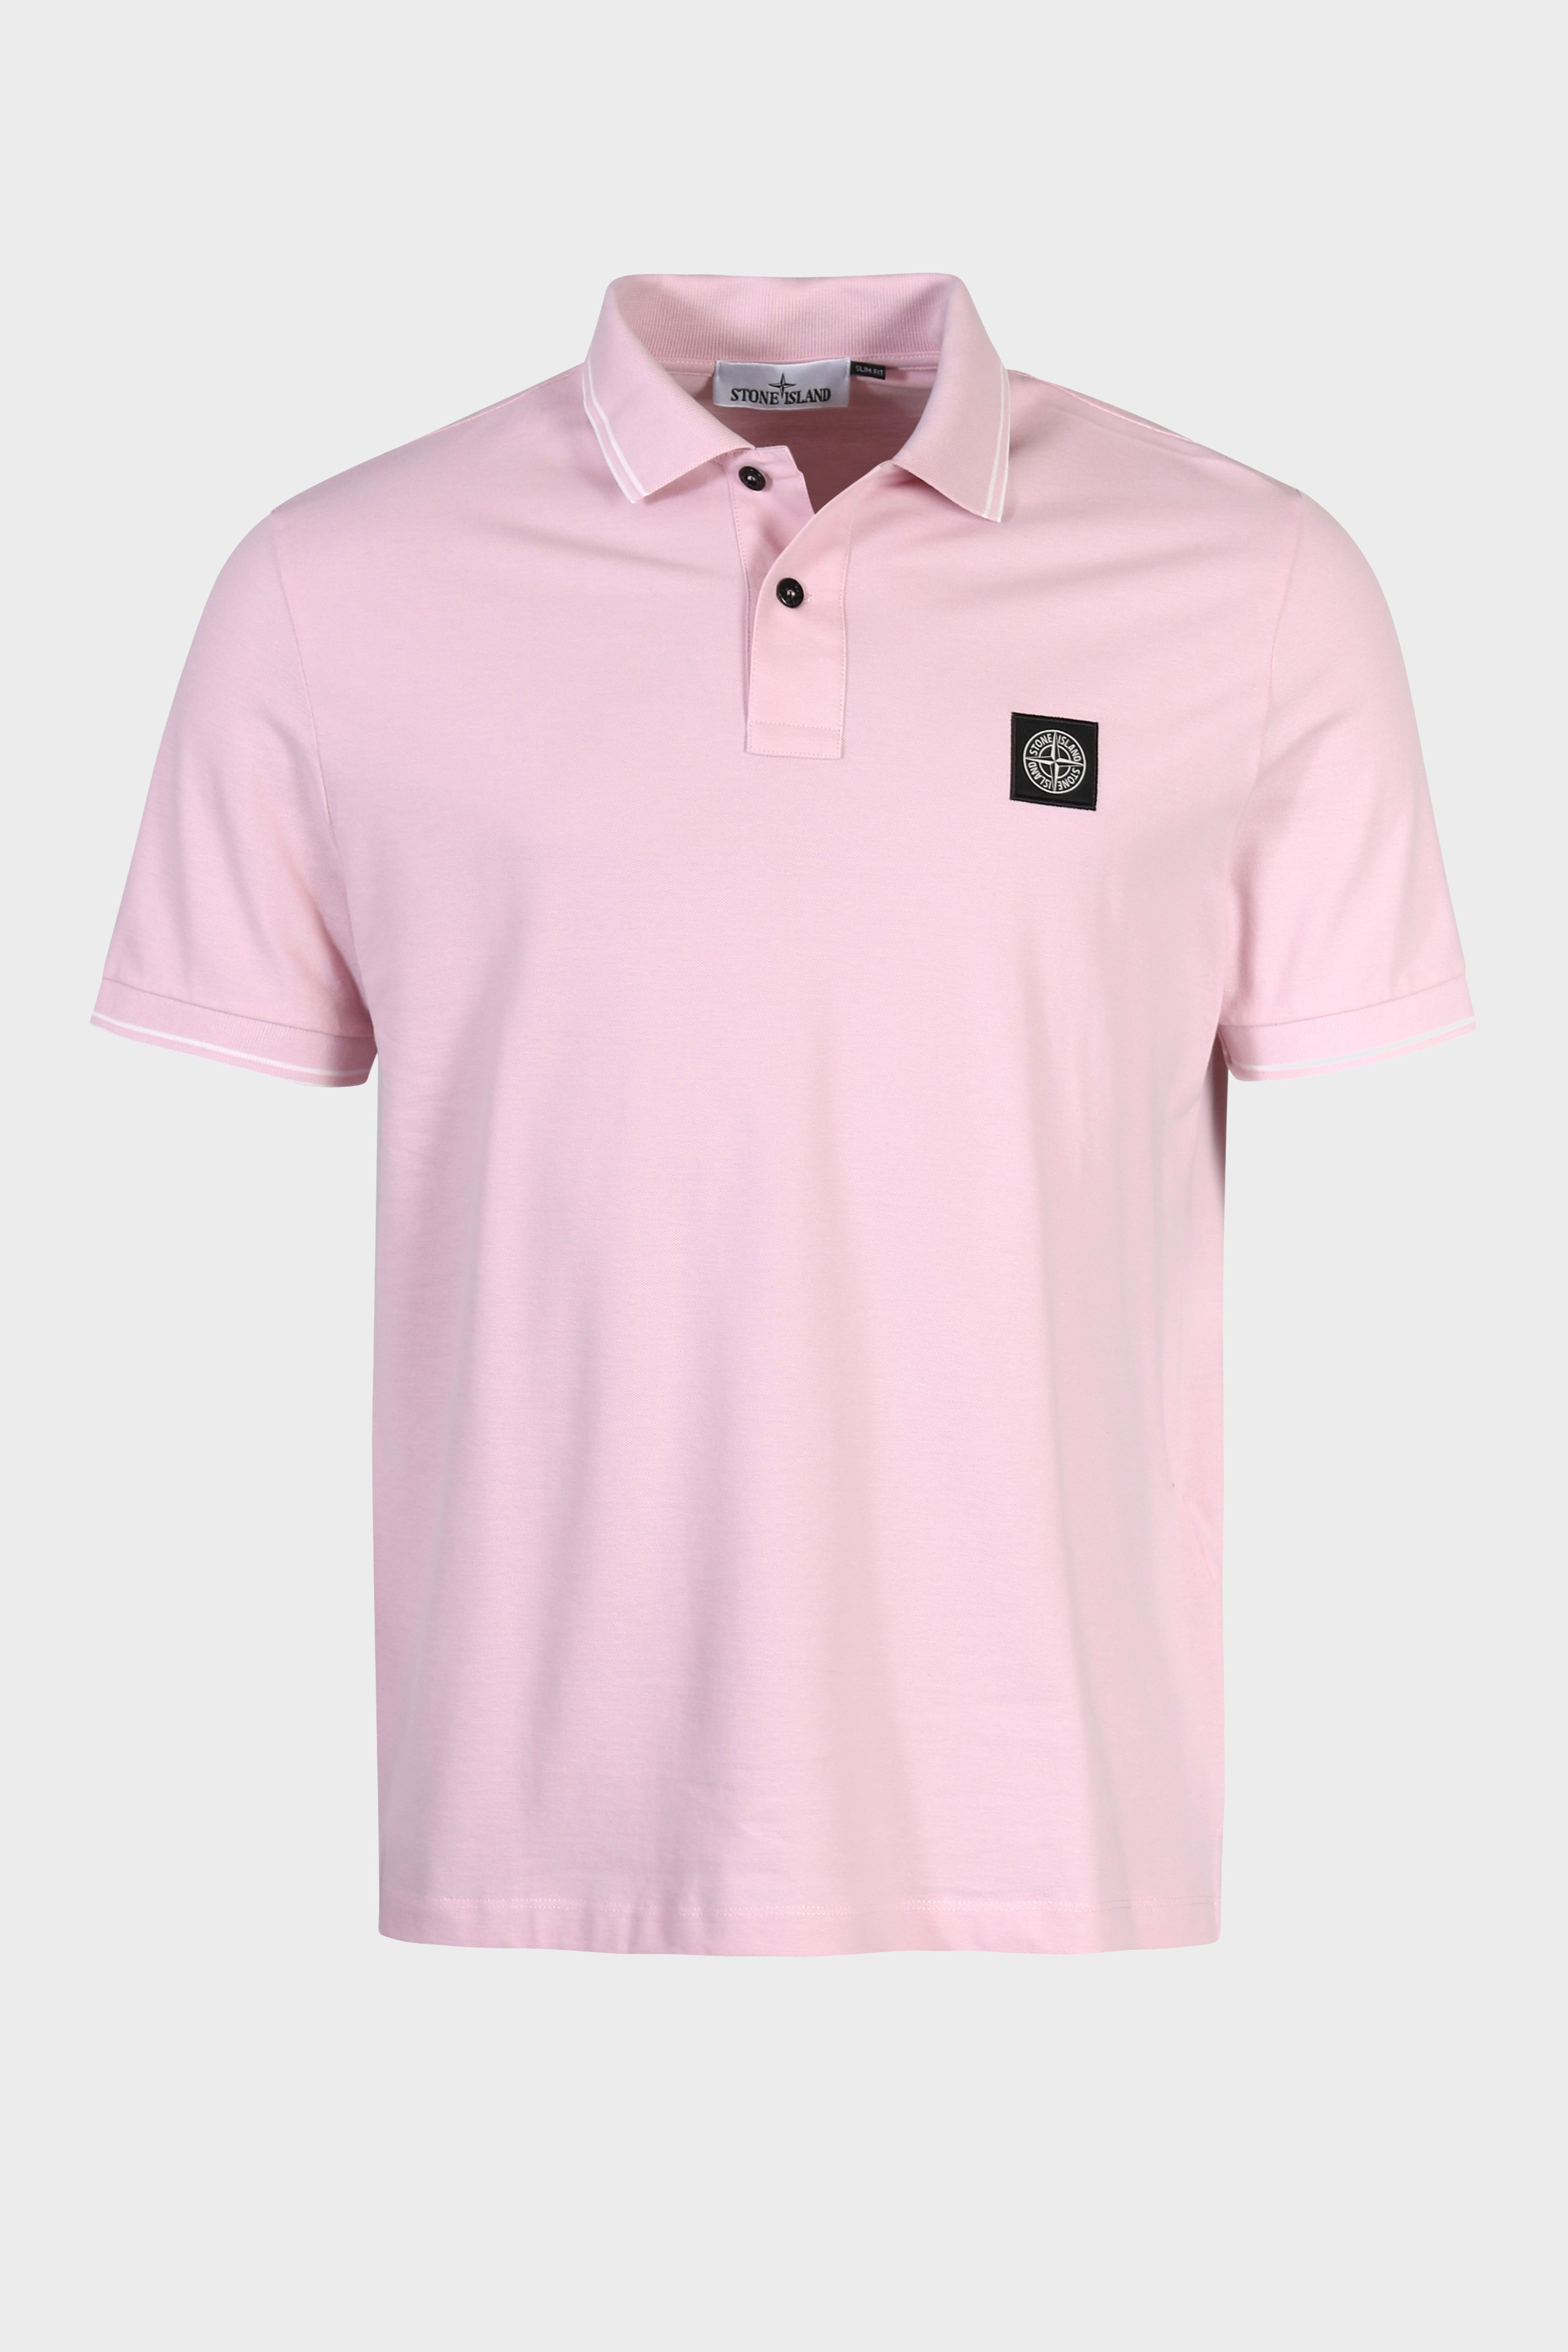 STONE ISLAND Slim Fit Polo Shirt in Light Pink 2XL